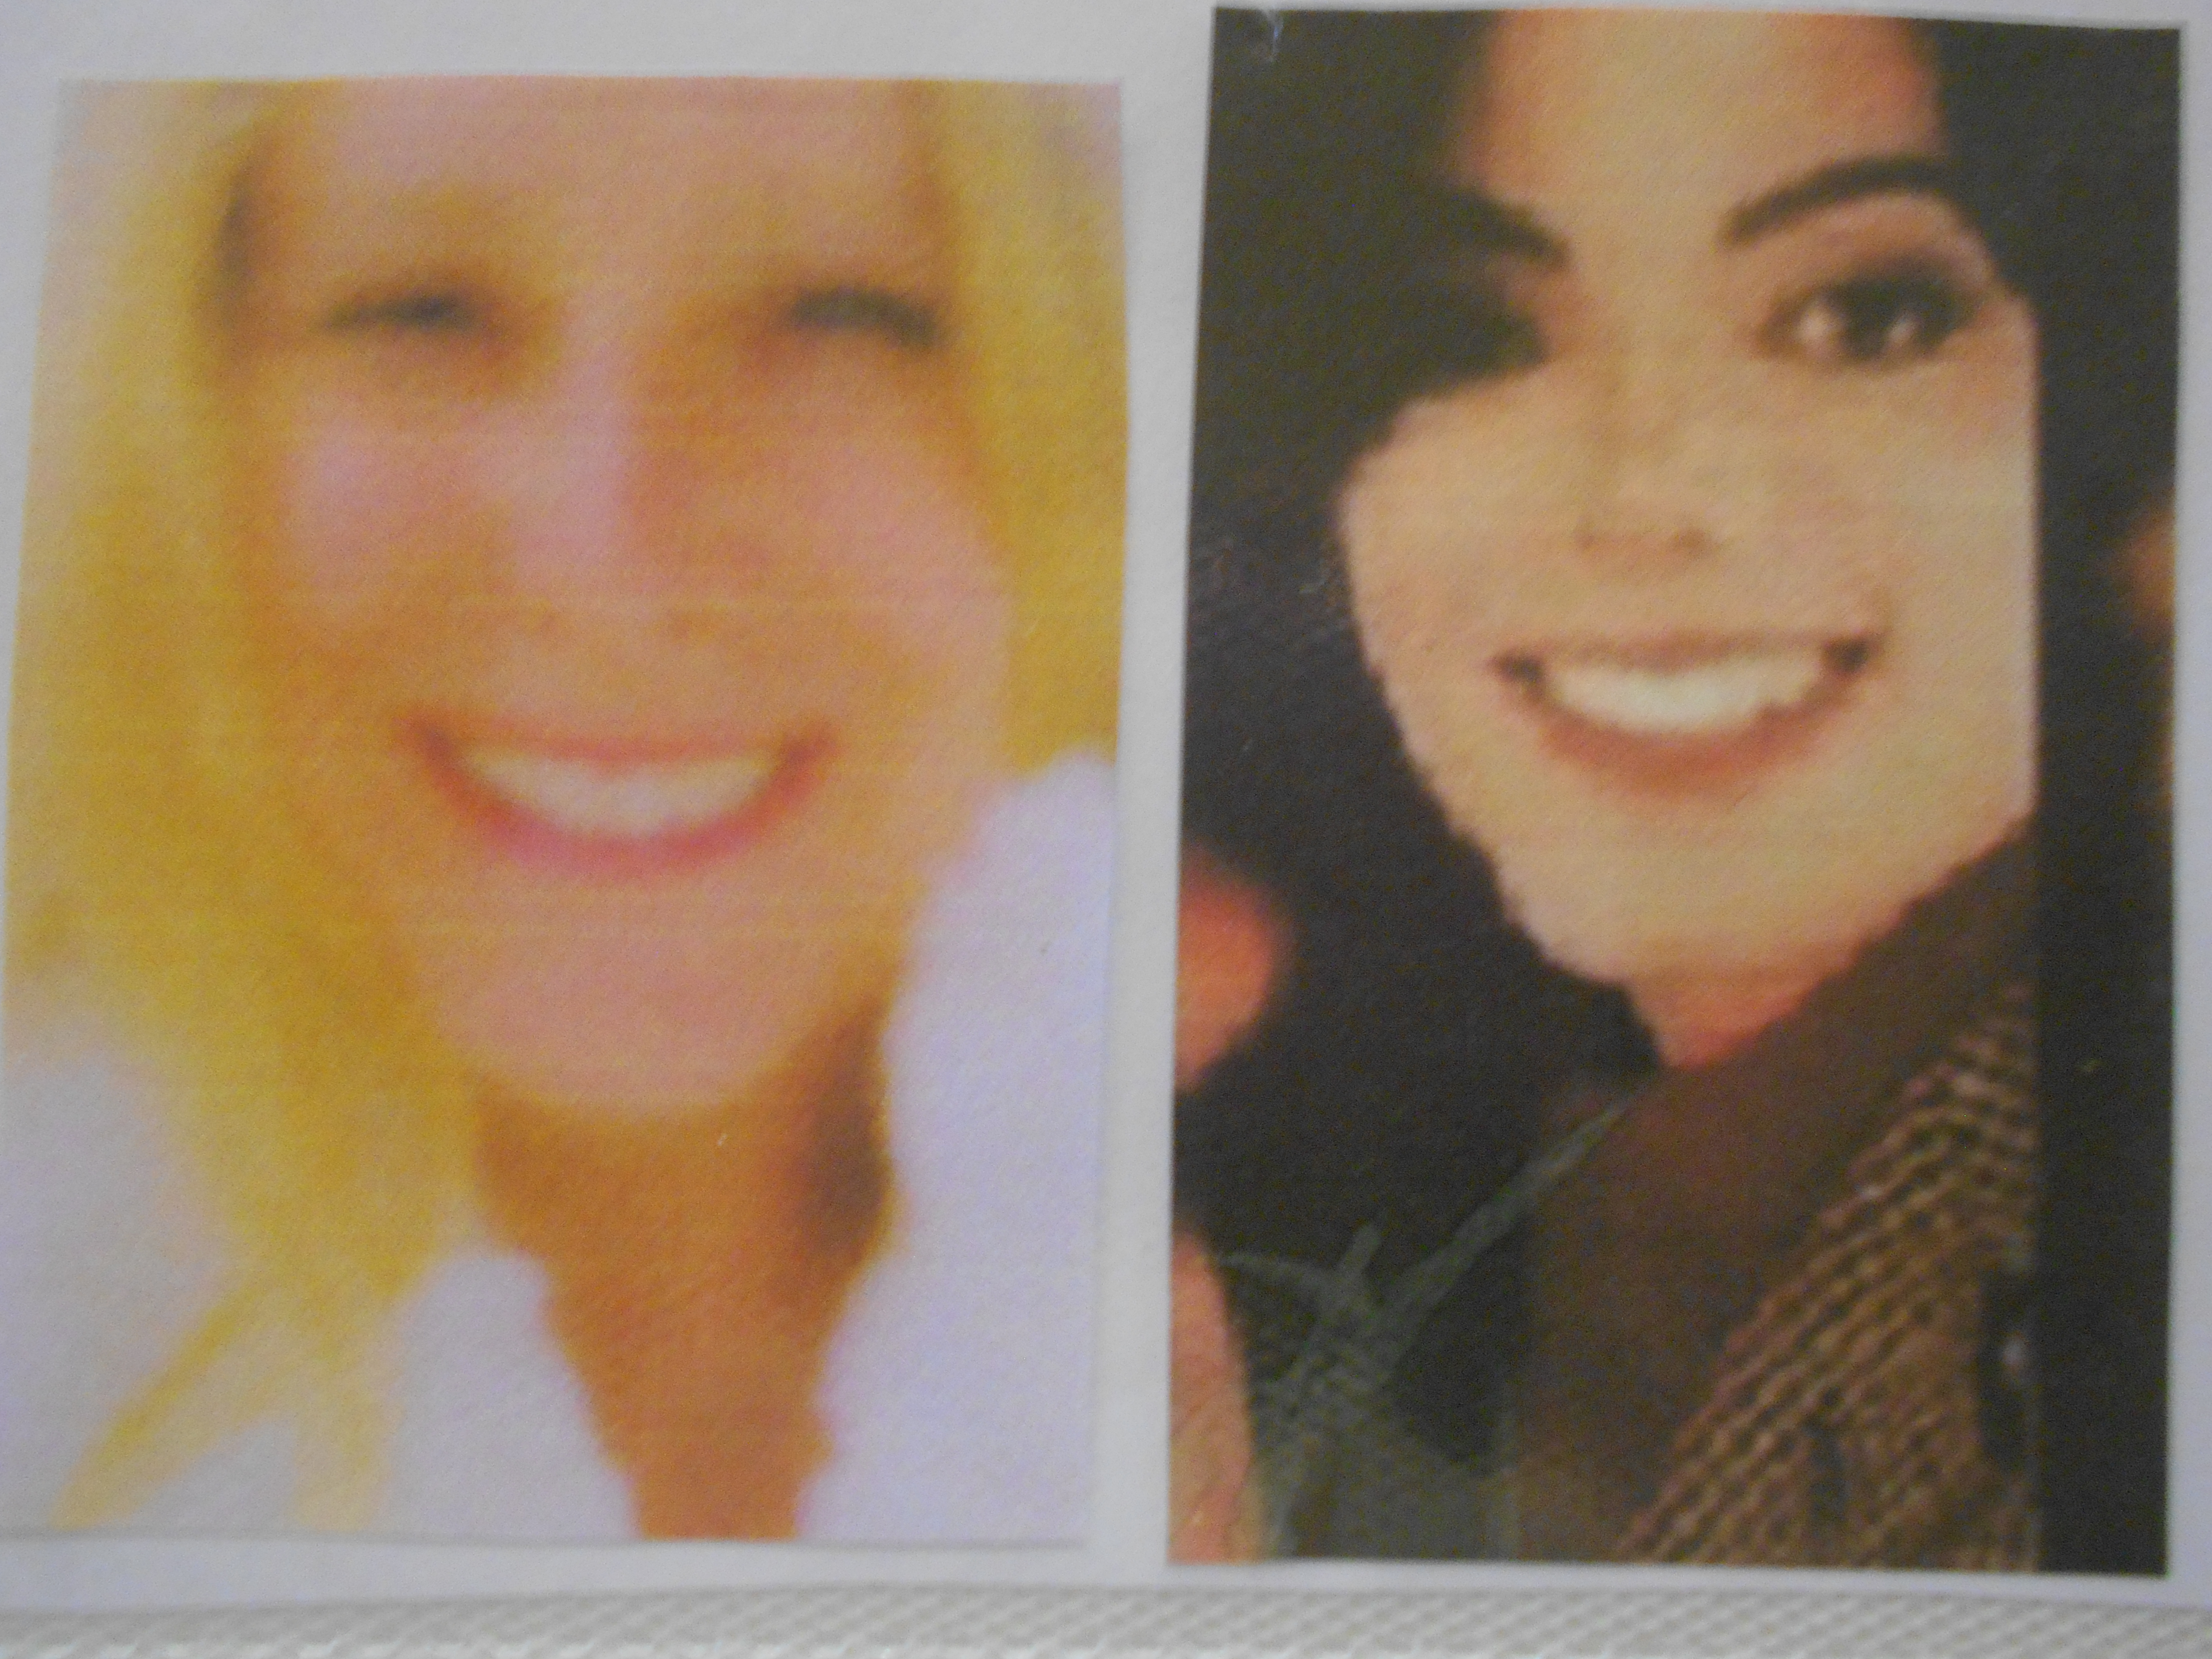 “A Sign for Michael – Smile Though Your Heart is Aching”